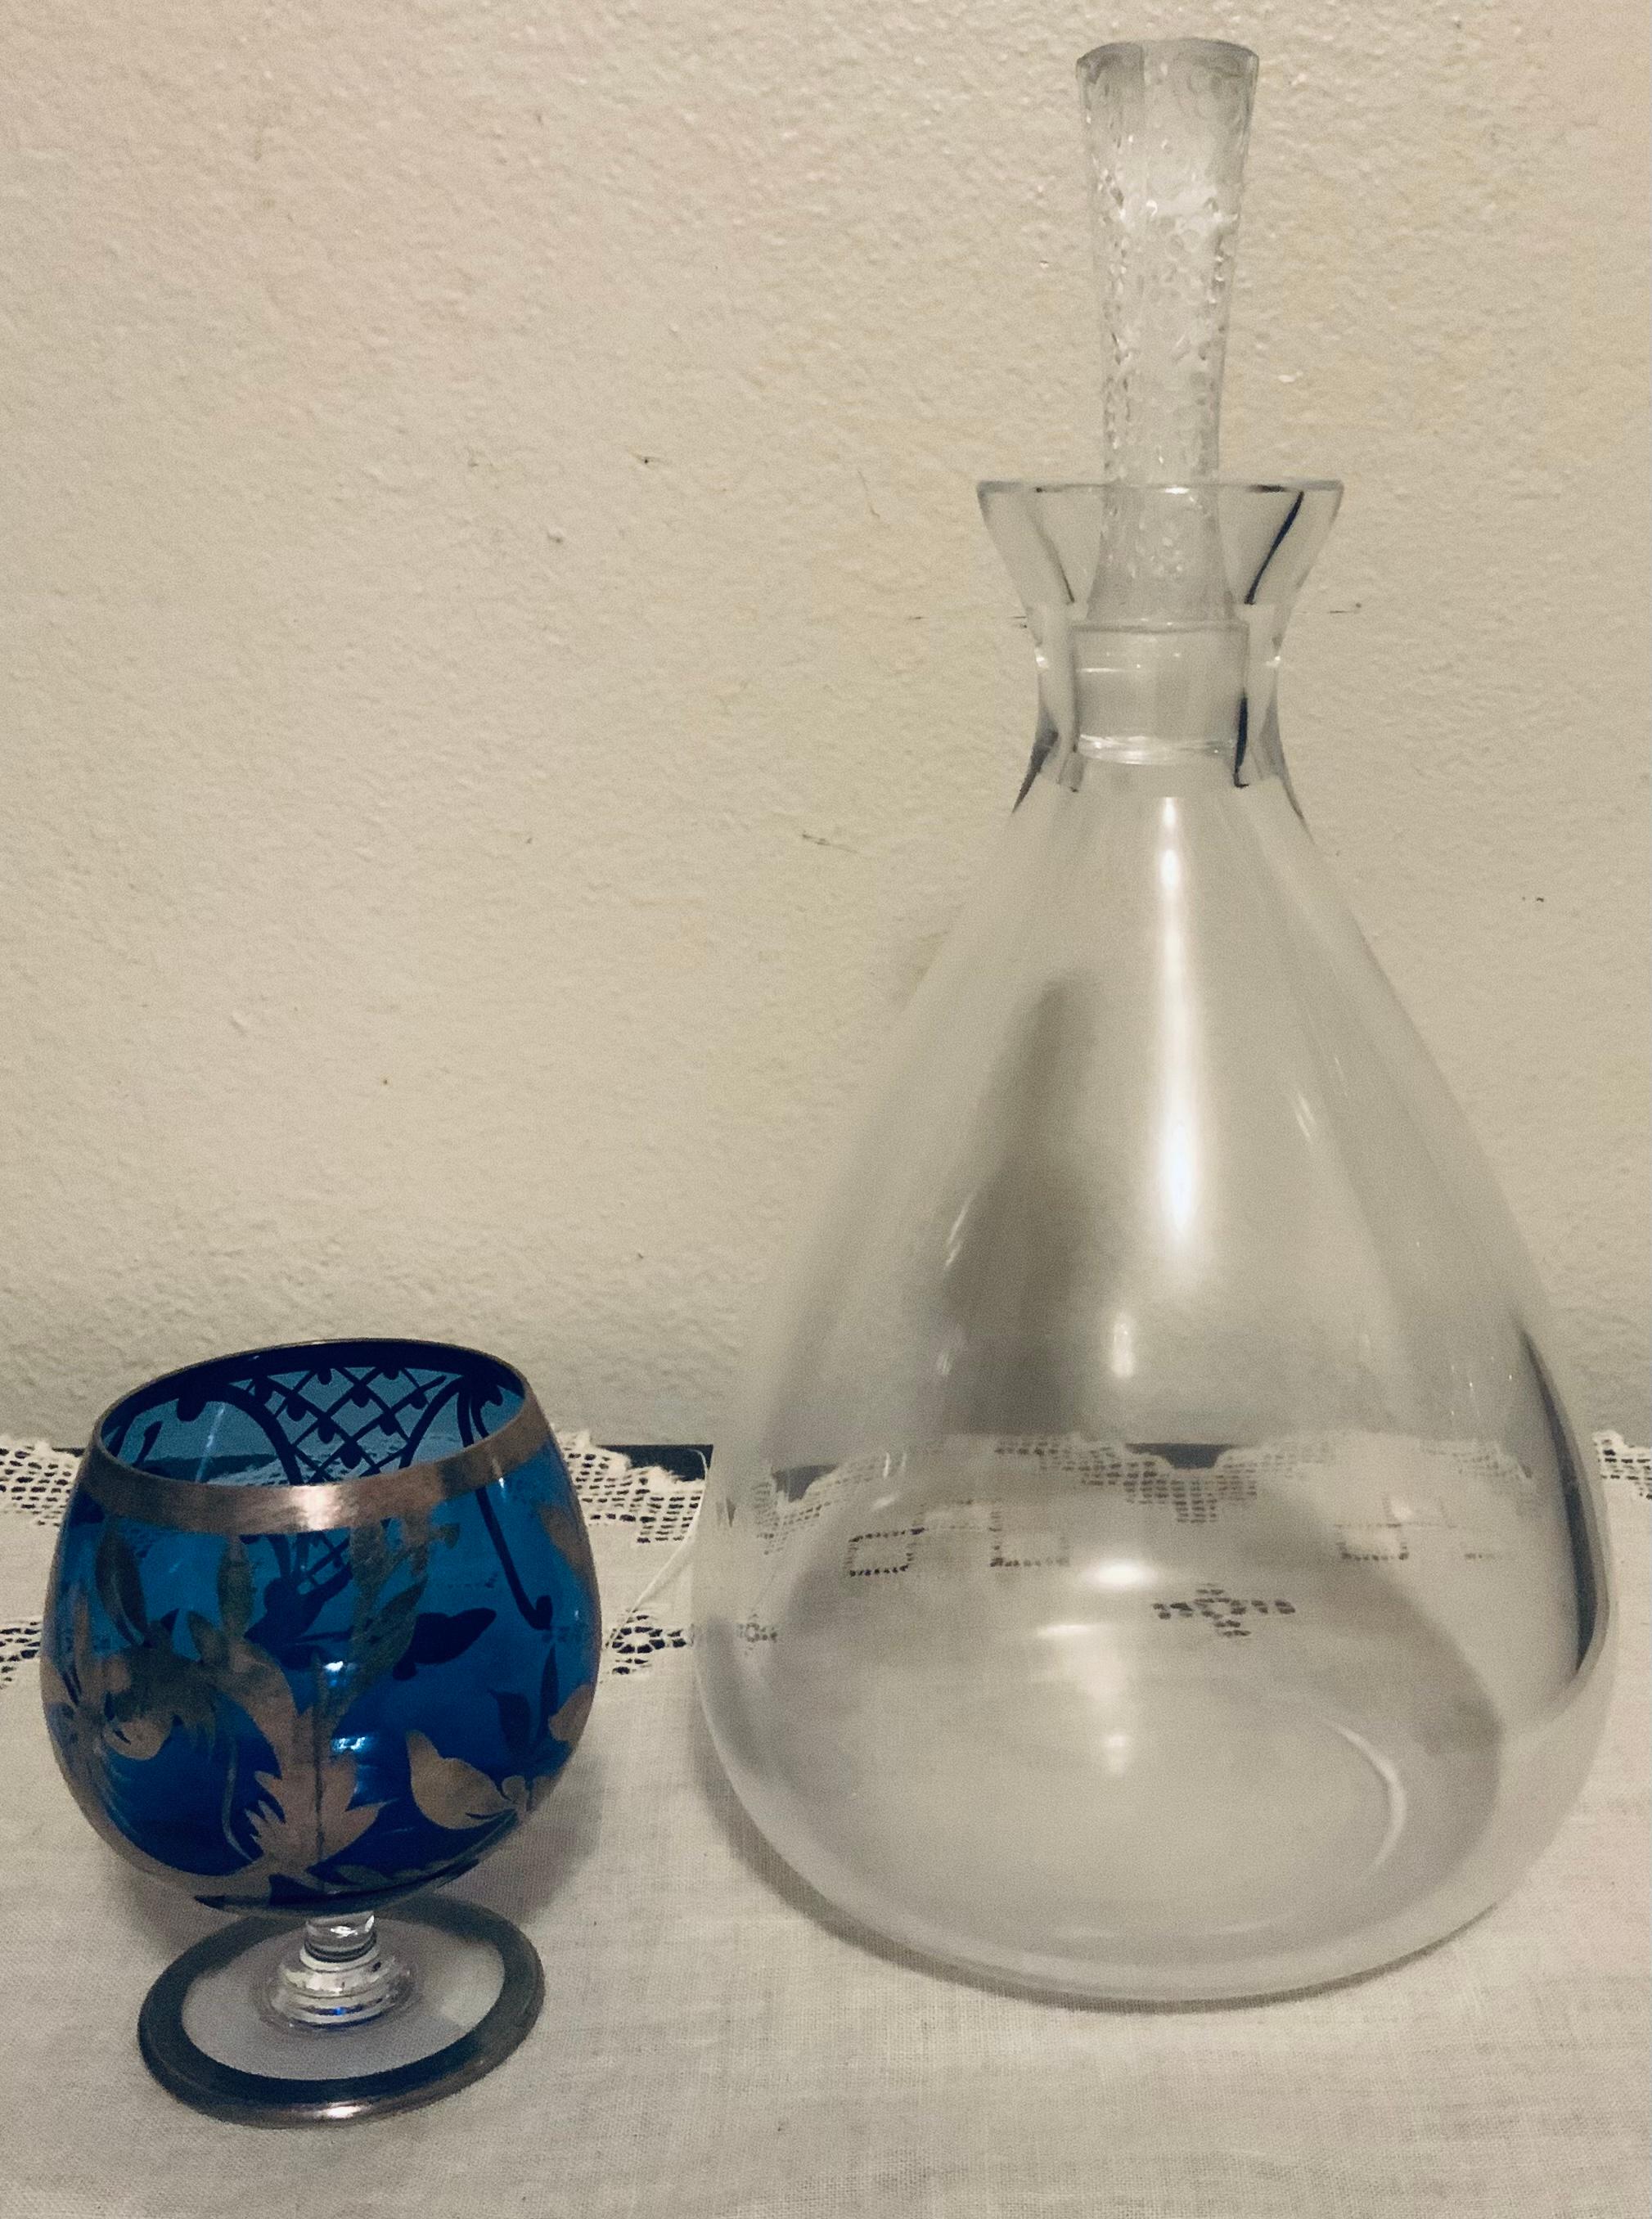 Lalique Crystal “Phalsbourg” Decanter In Good Condition For Sale In Guaynabo, PR